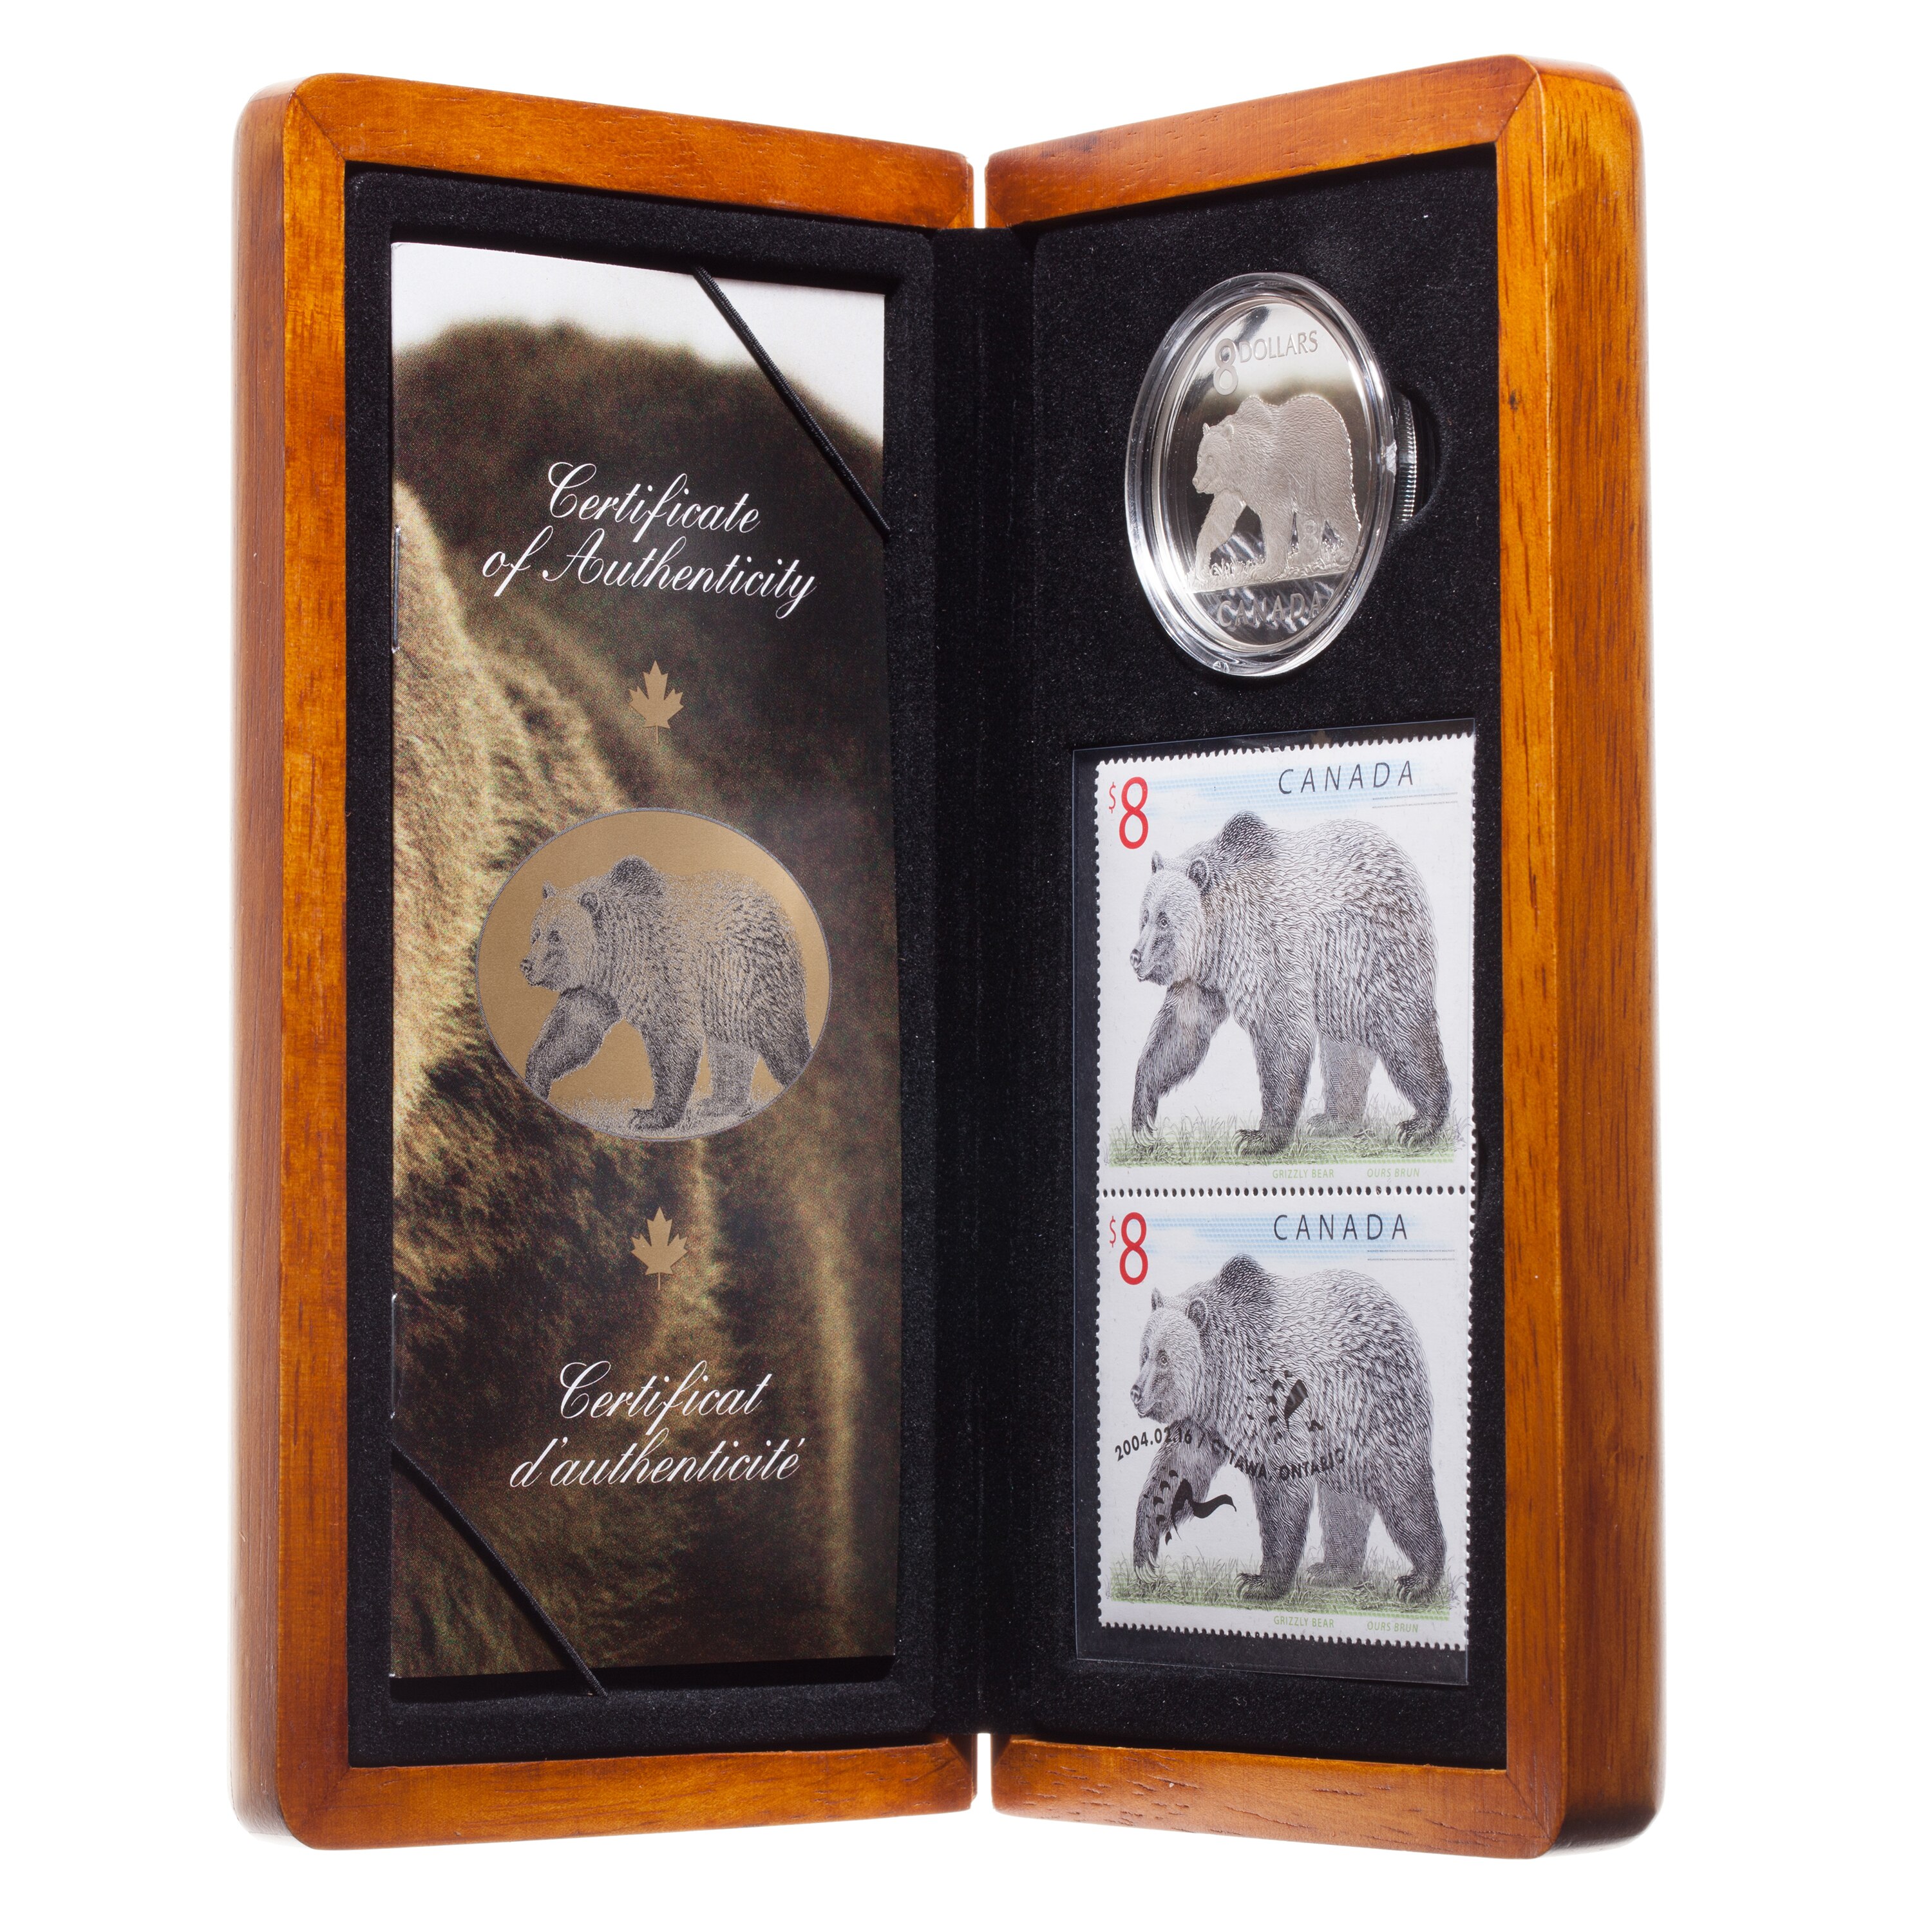 Canada 2004 Great Grizzly Bear Coin and Two Stamps Set $8 Pure Silver Proof 